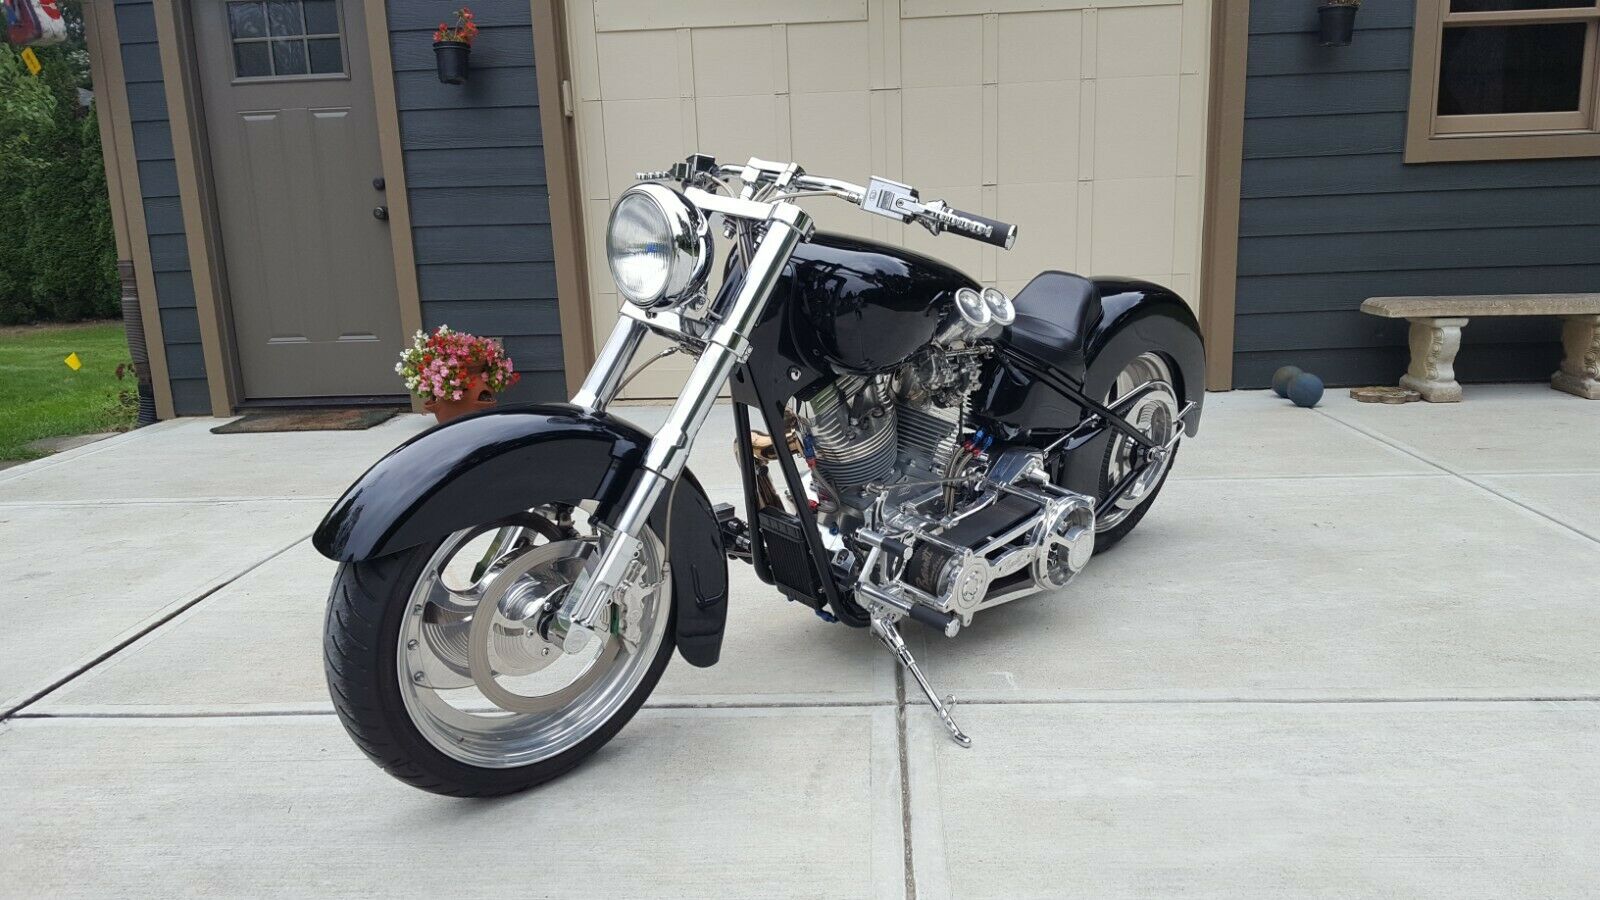 2001 Custom Built Motorcycles Pro Street  One Of A Kind, Hand Built, Big Bore, 4carb Motorcycle,  Read Narrative Below